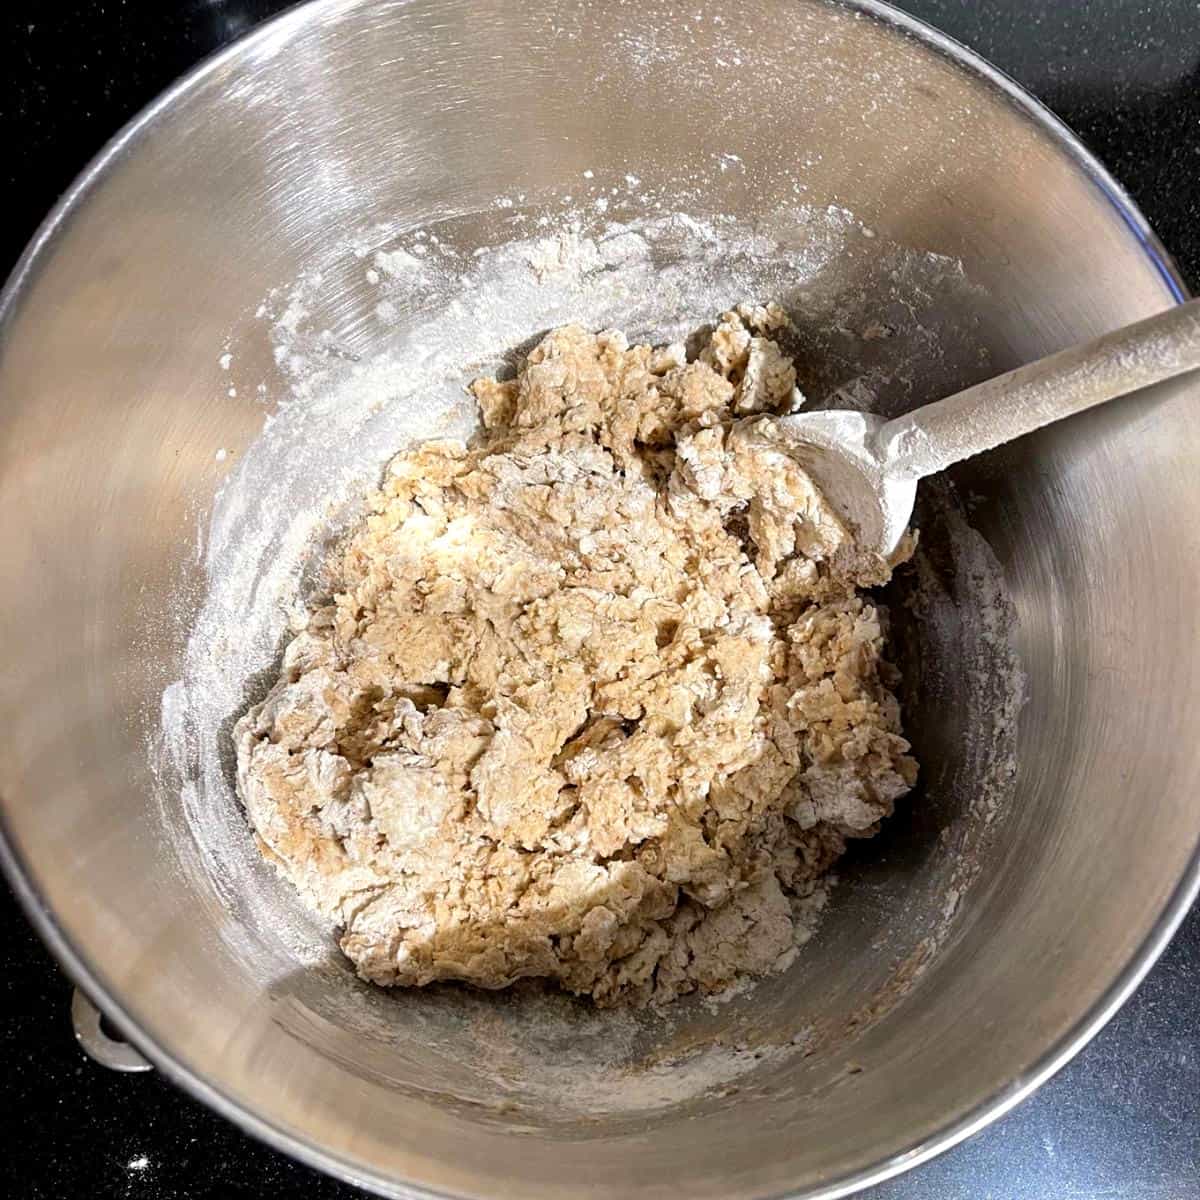 Shaggy dough for oatmeal bread in bowl.